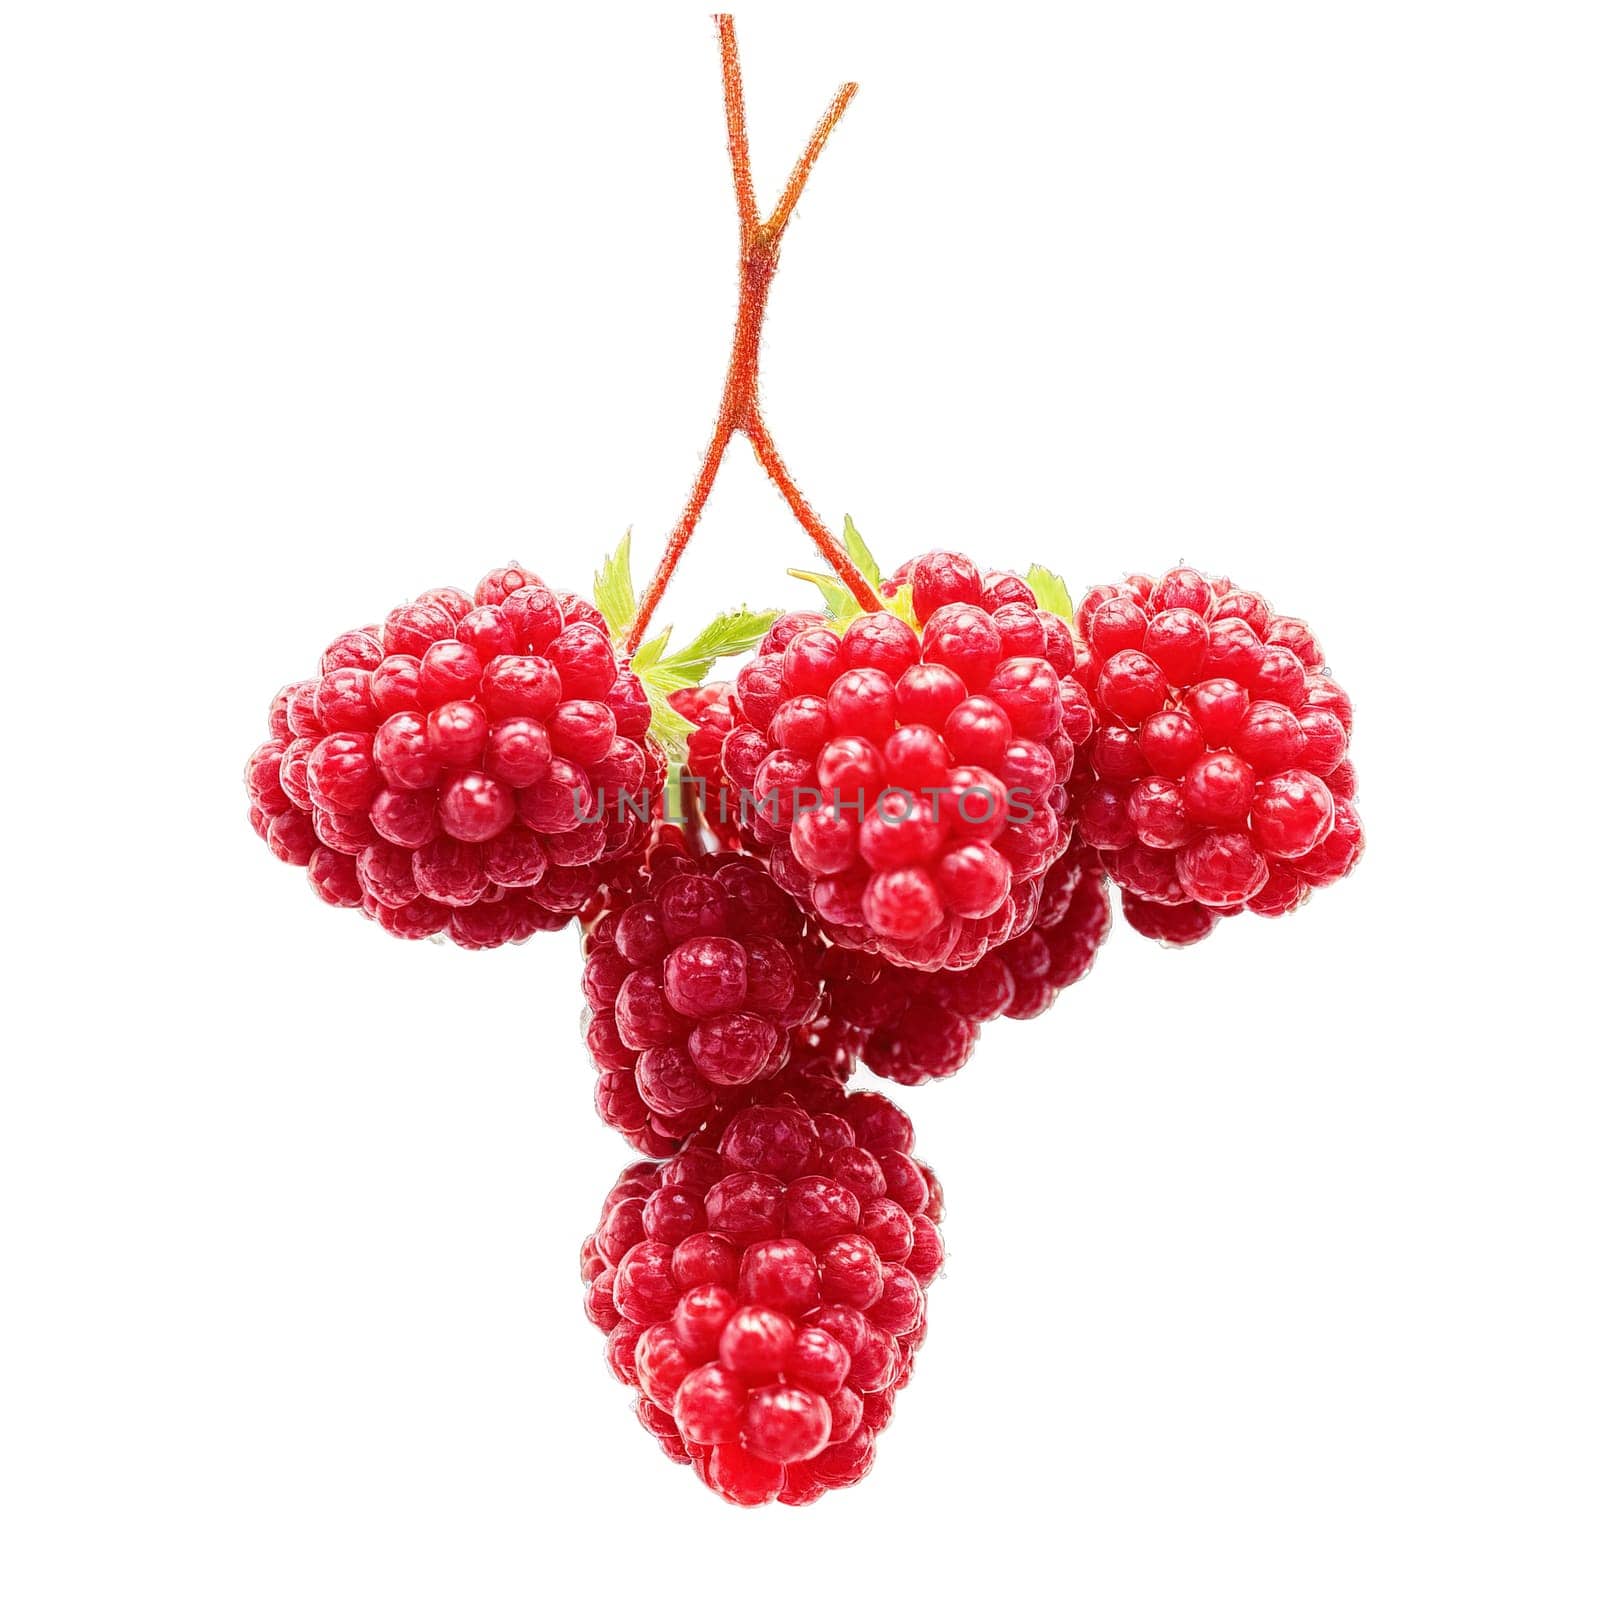 Loganberries dark red loganberries arranged in a cross shape with some berries bursting and juice by panophotograph